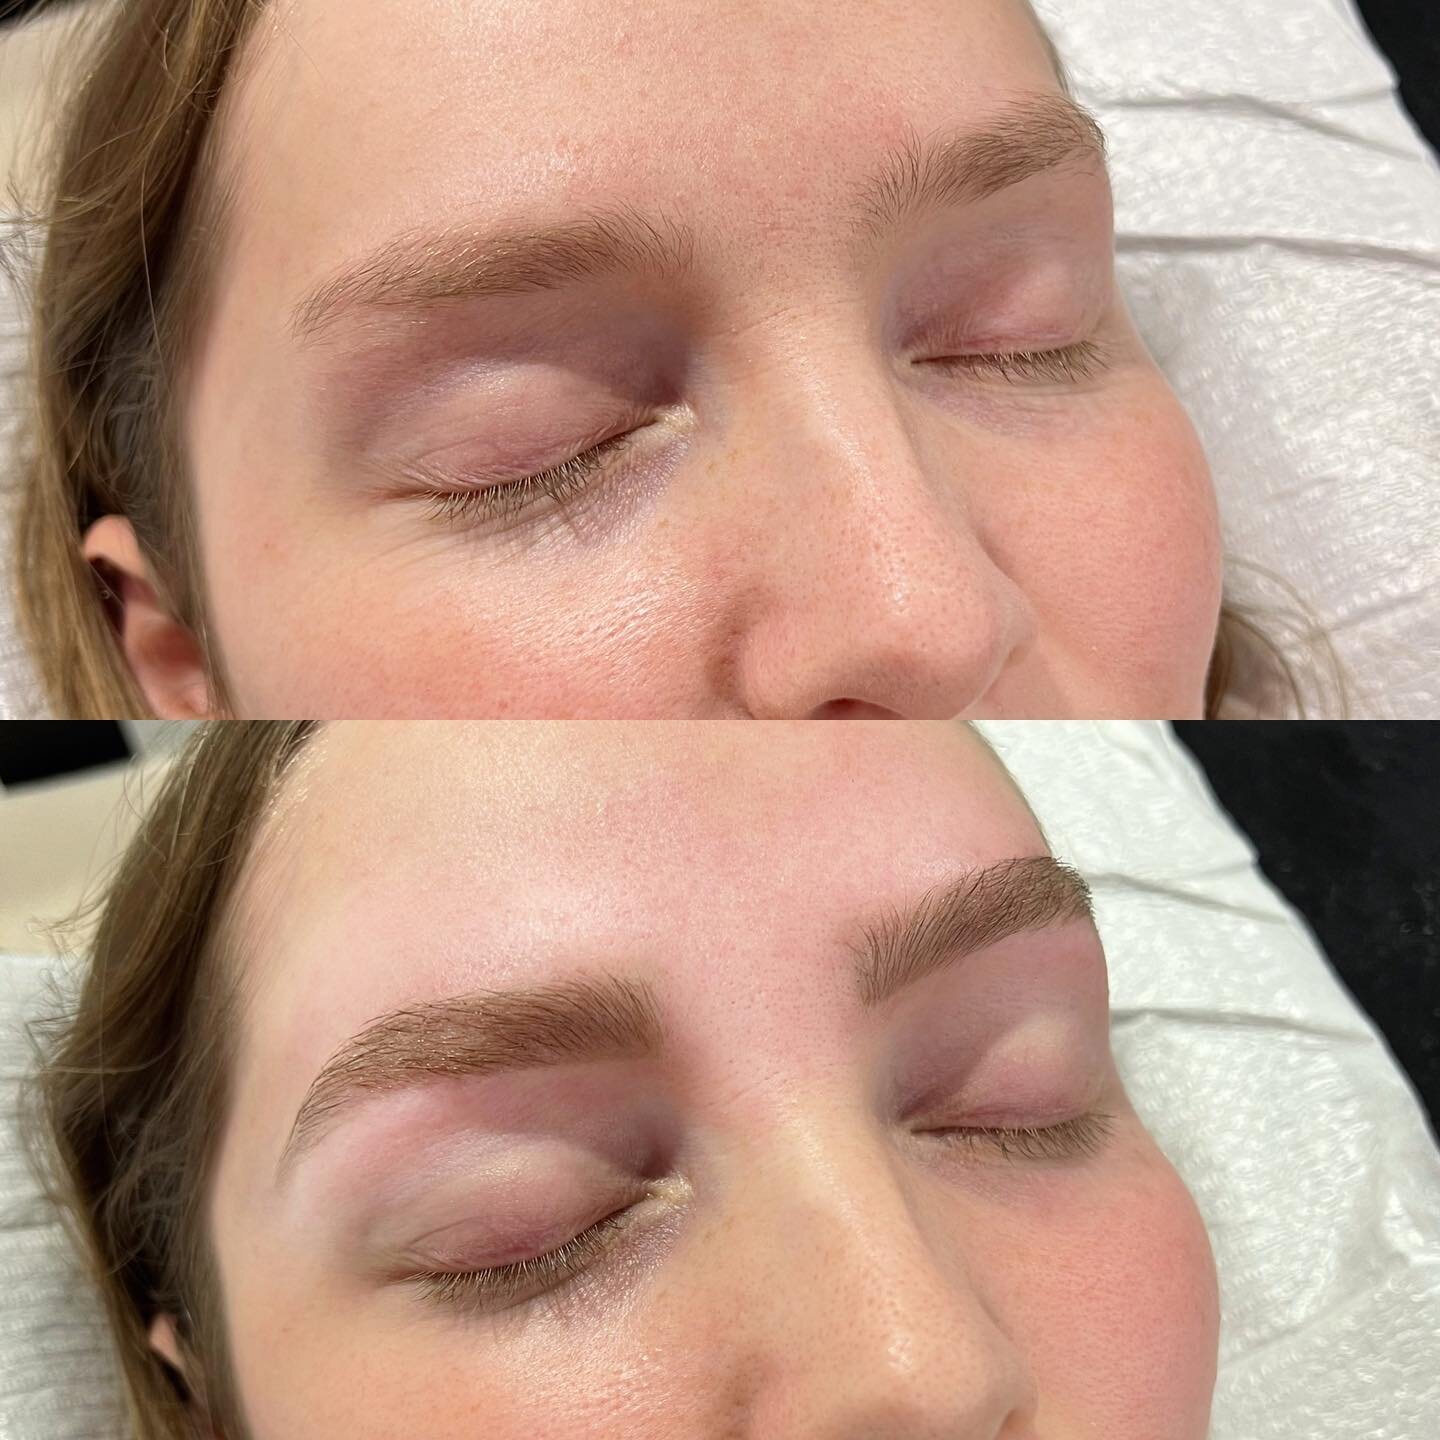 A small change can make such a difference✨| Our Signature &lsquo;Perfecting Brows &amp; Tint&rsquo; combo✨ 

#browtransformation #brows #aucklandbeauty #browshaping #browtinting #beforeandafter #westauckland #blockhousebay #aucklandcity